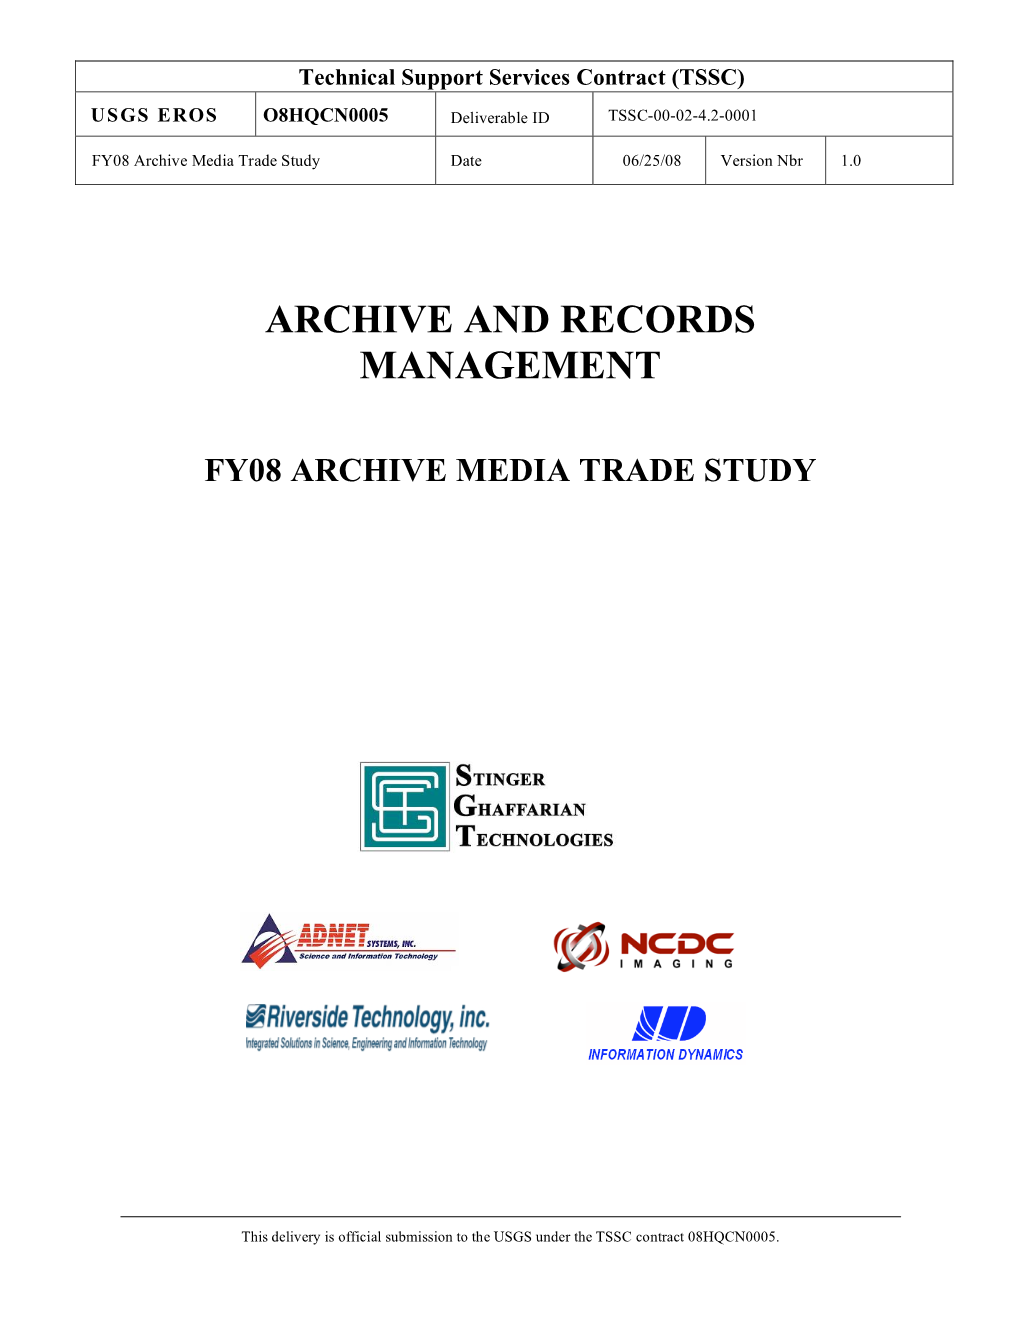 FY08 Archive and Media Study